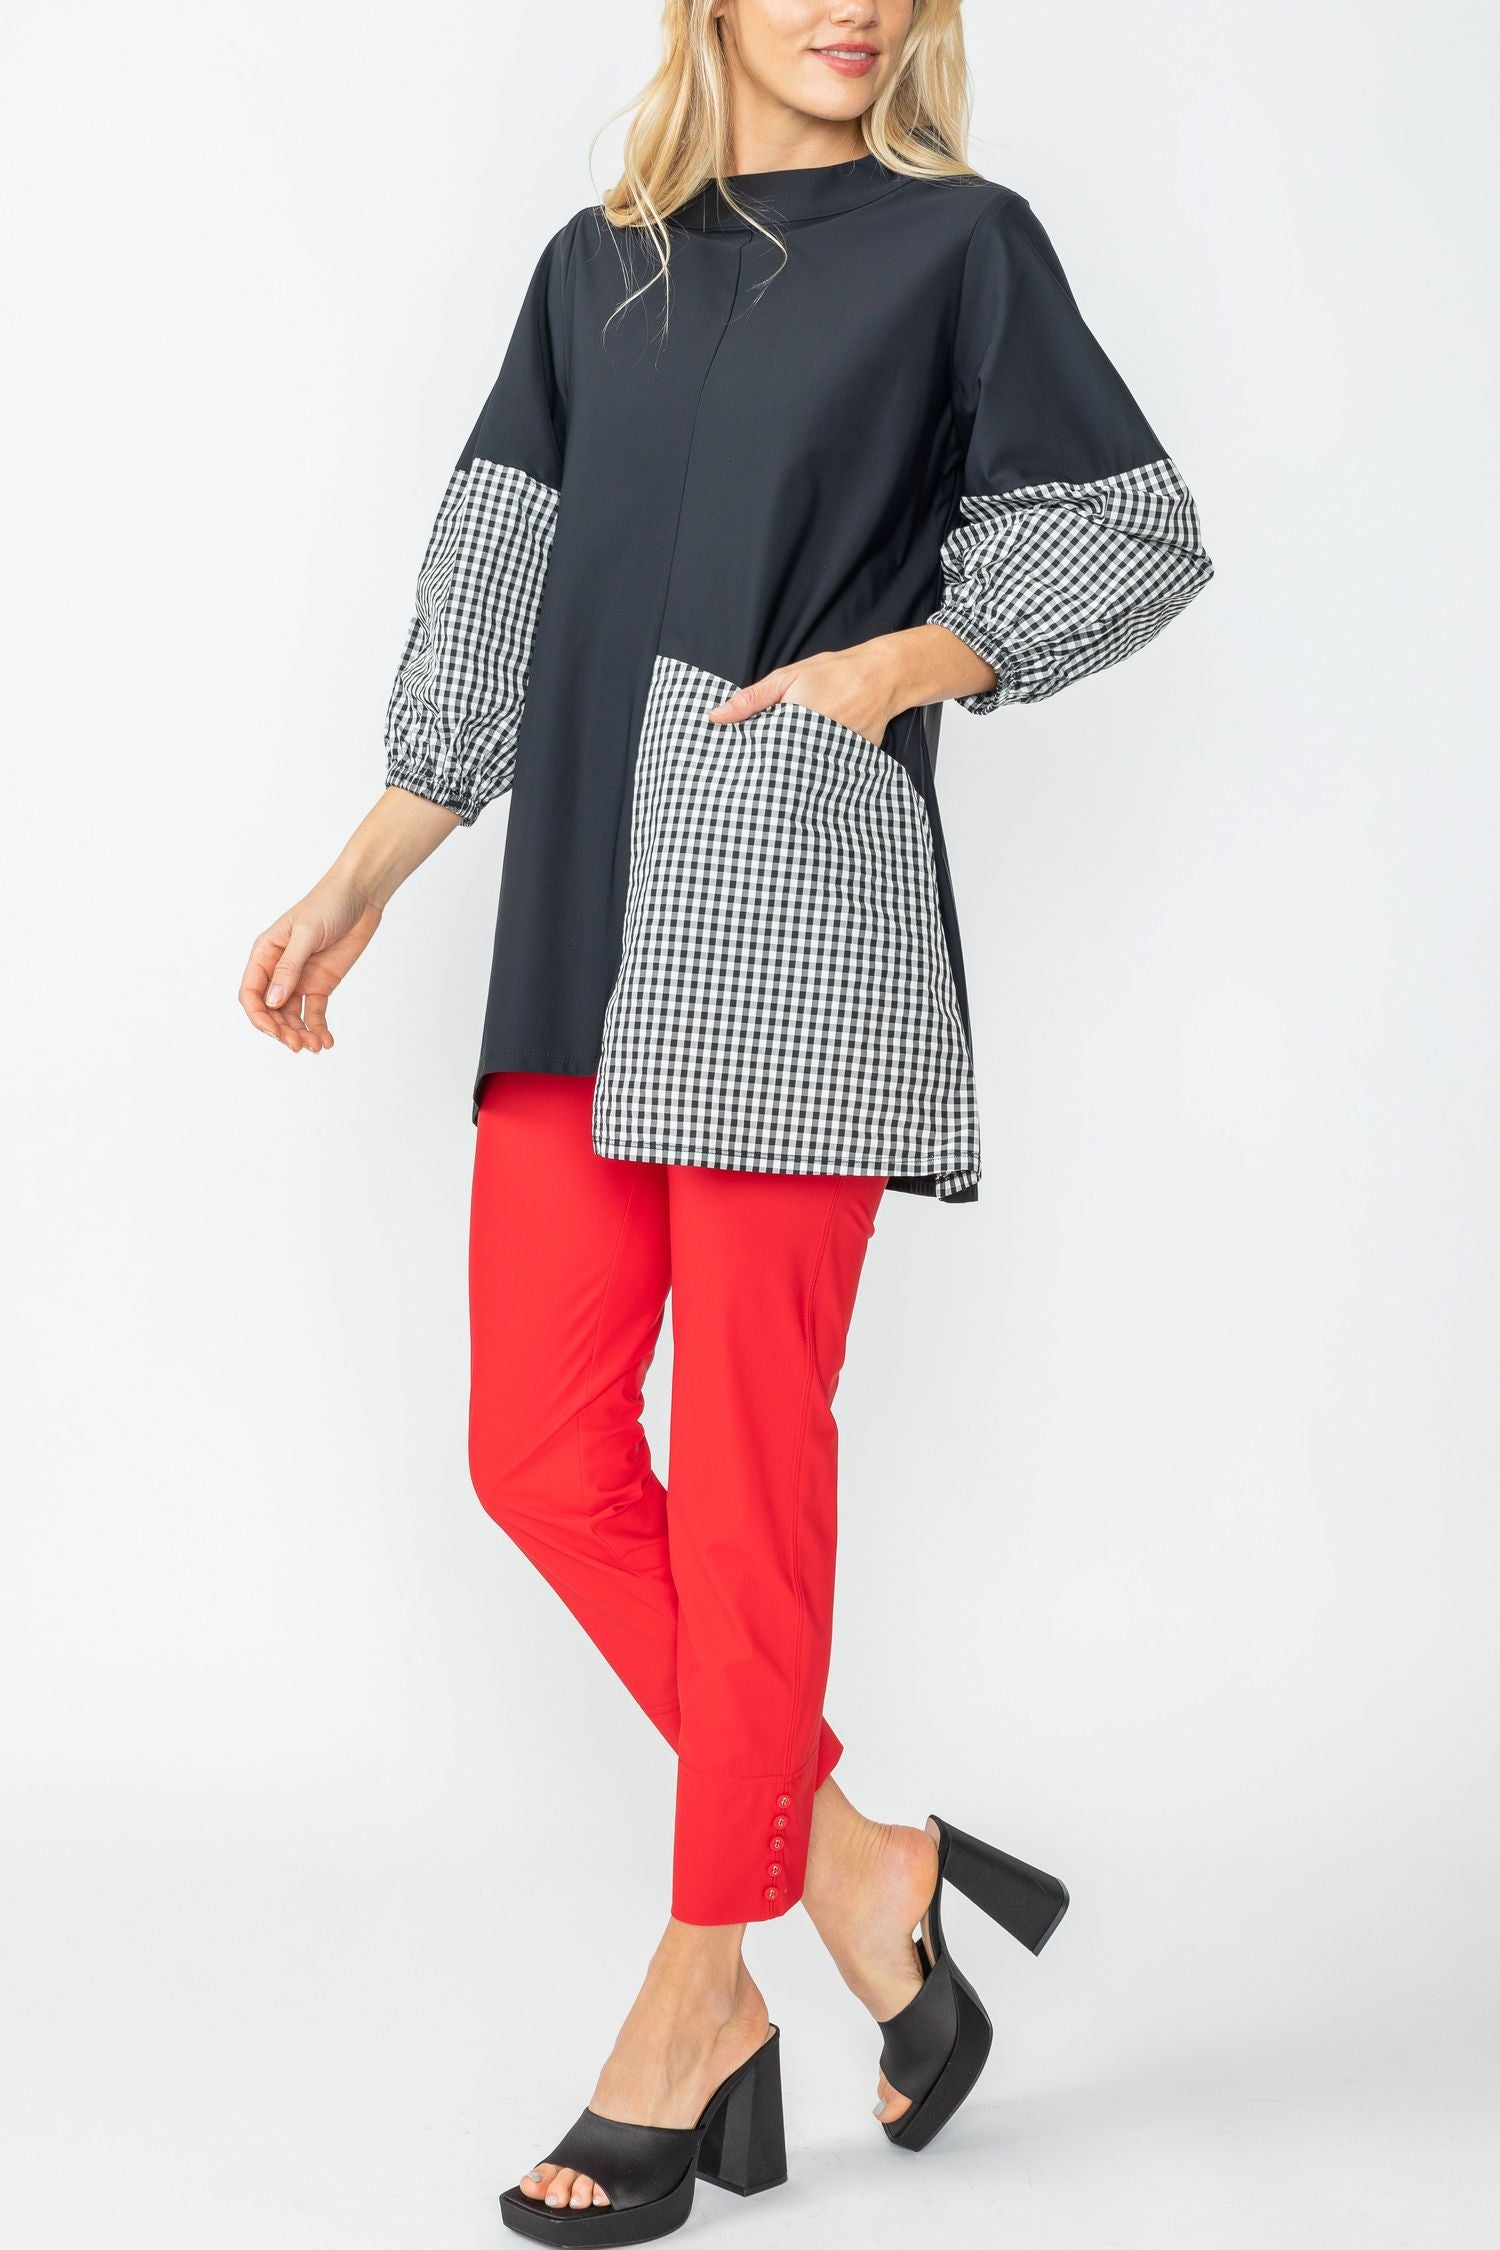 Black Gingham Contrast Tunic Top